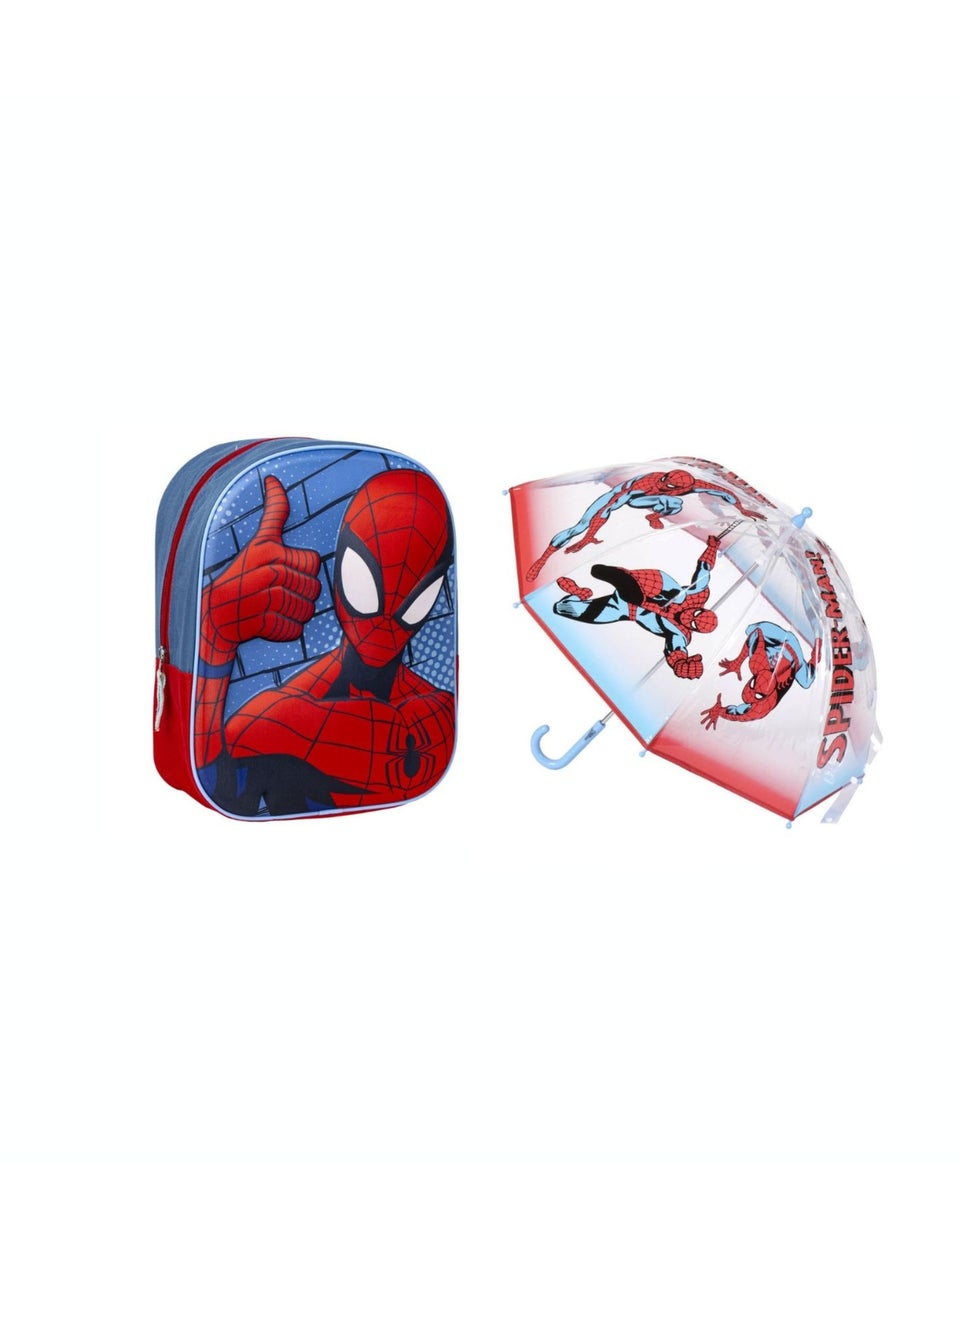 Spiderman Red All Weather Set with Backpack And Umbrella